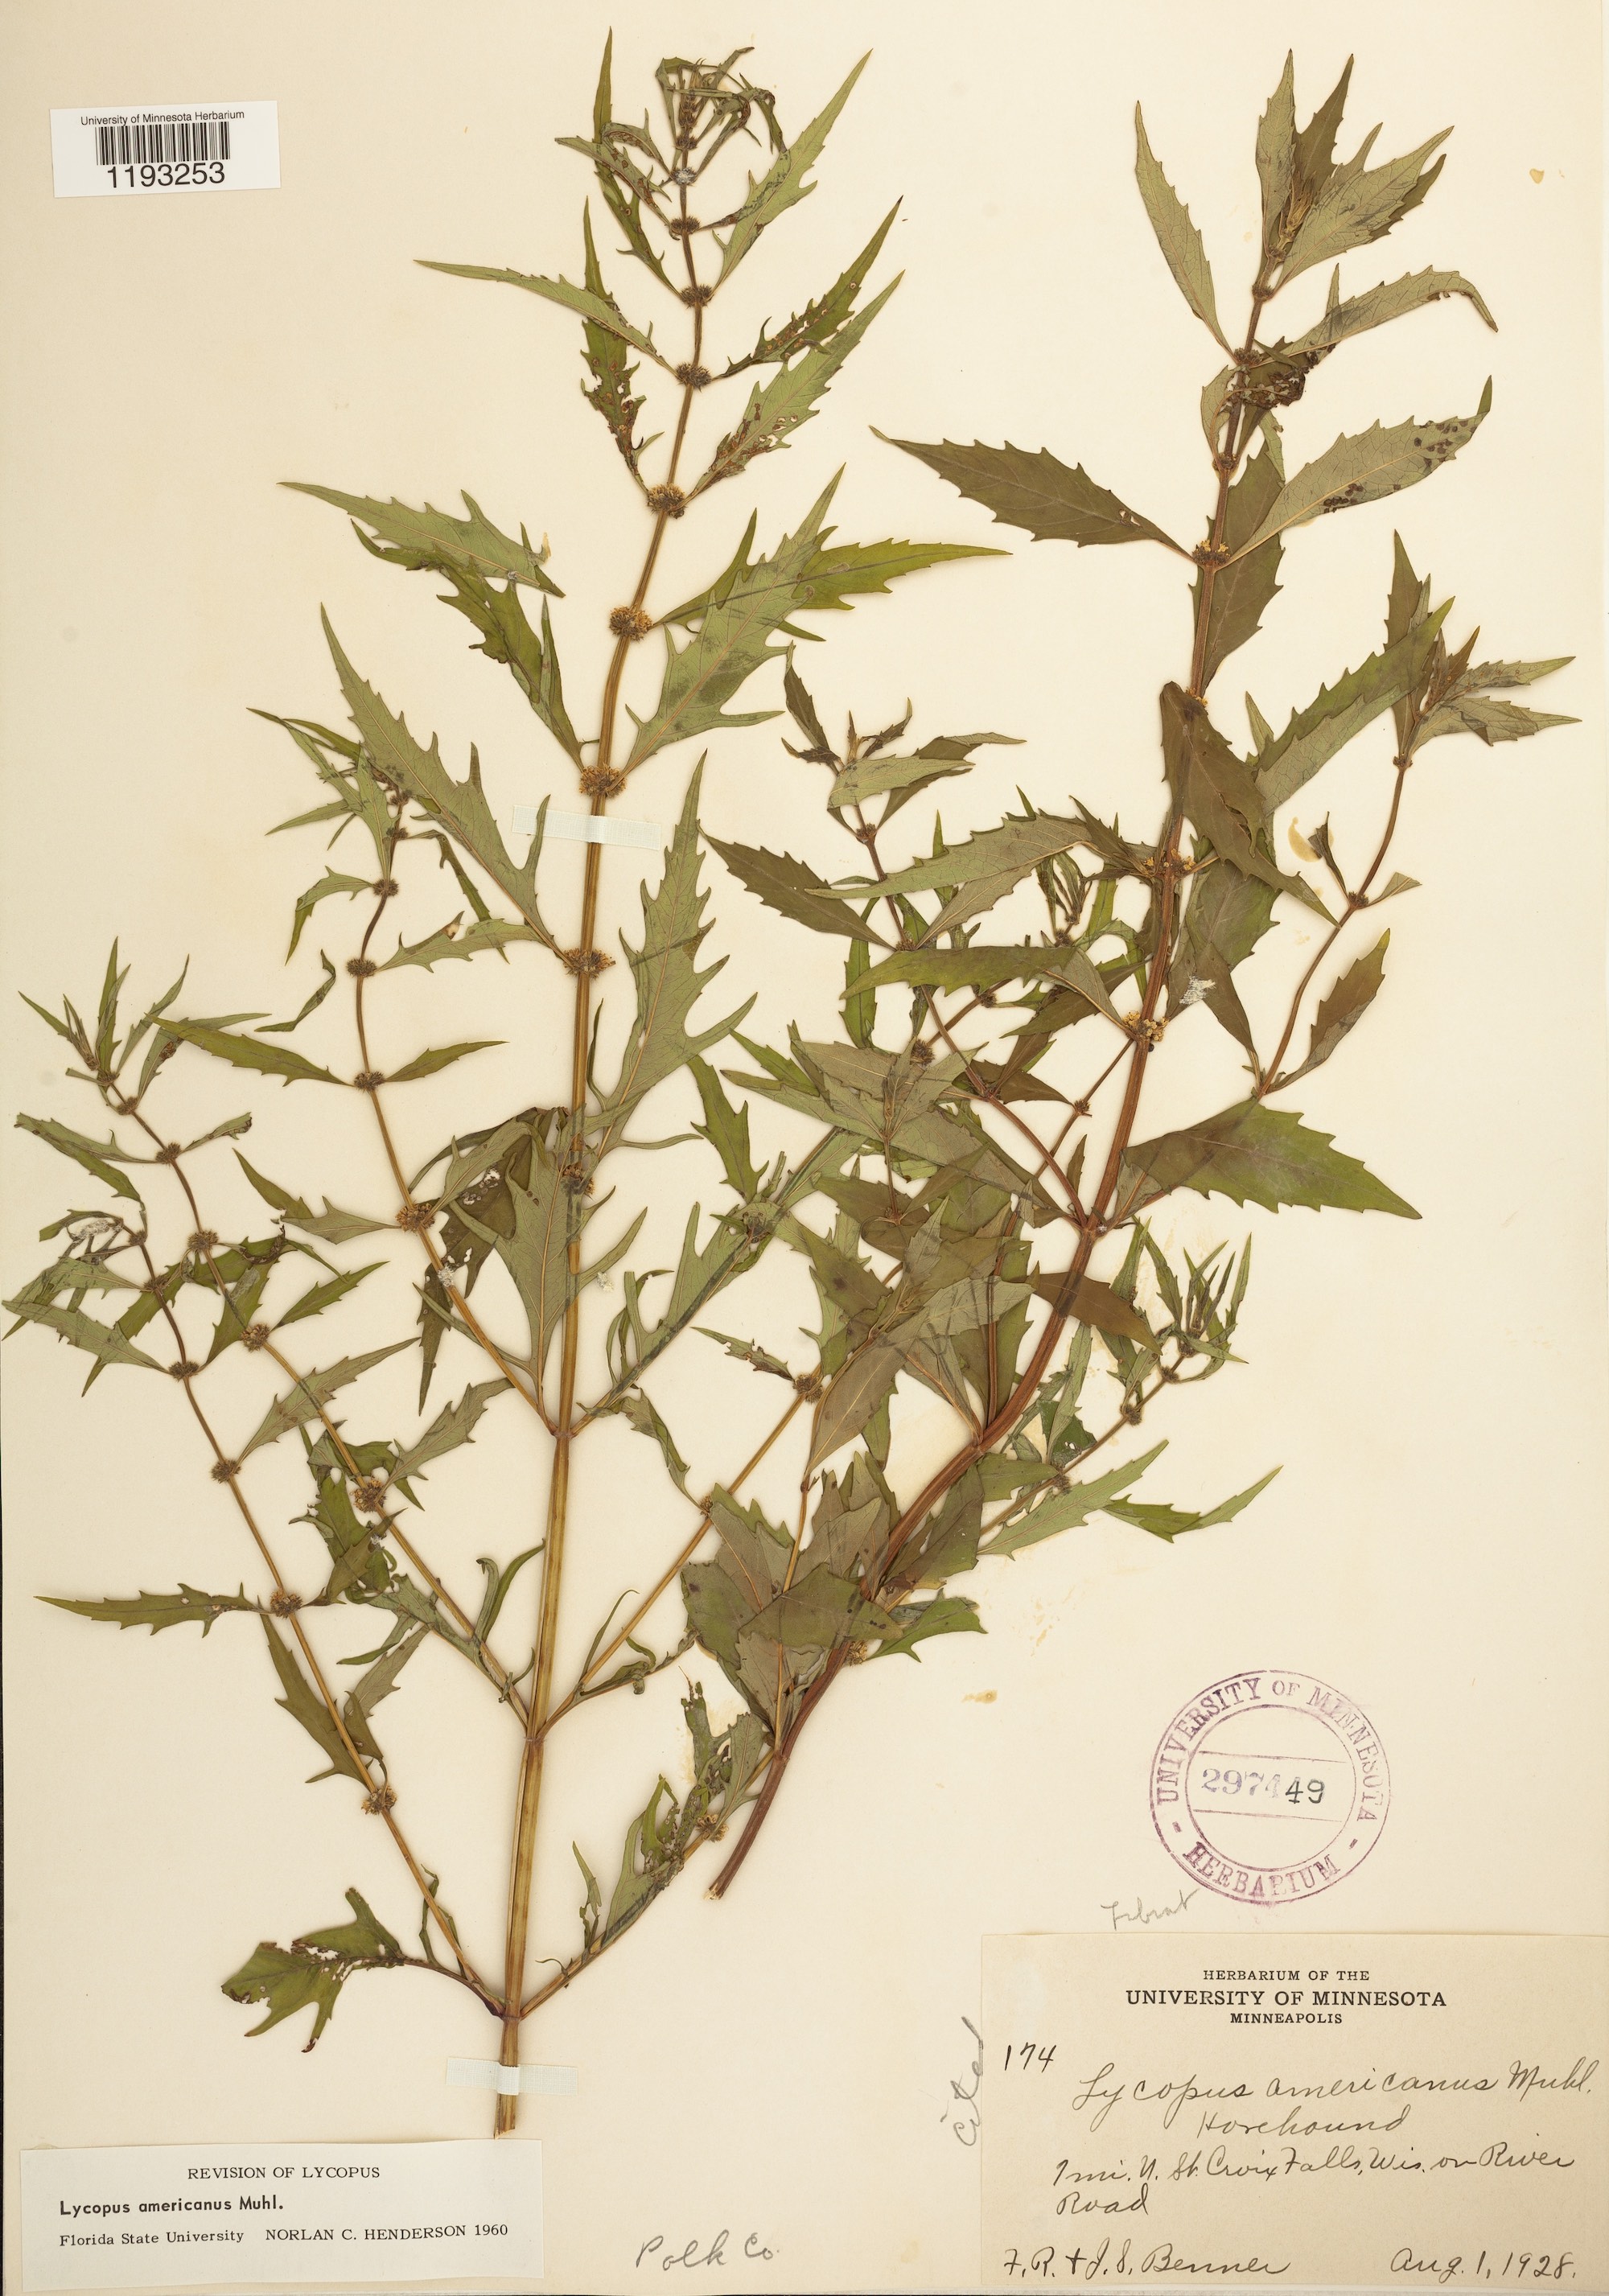 American Water Horehound specimen collected near St. Croix Falls, Wisconsin on River Road on August 1, 1928.